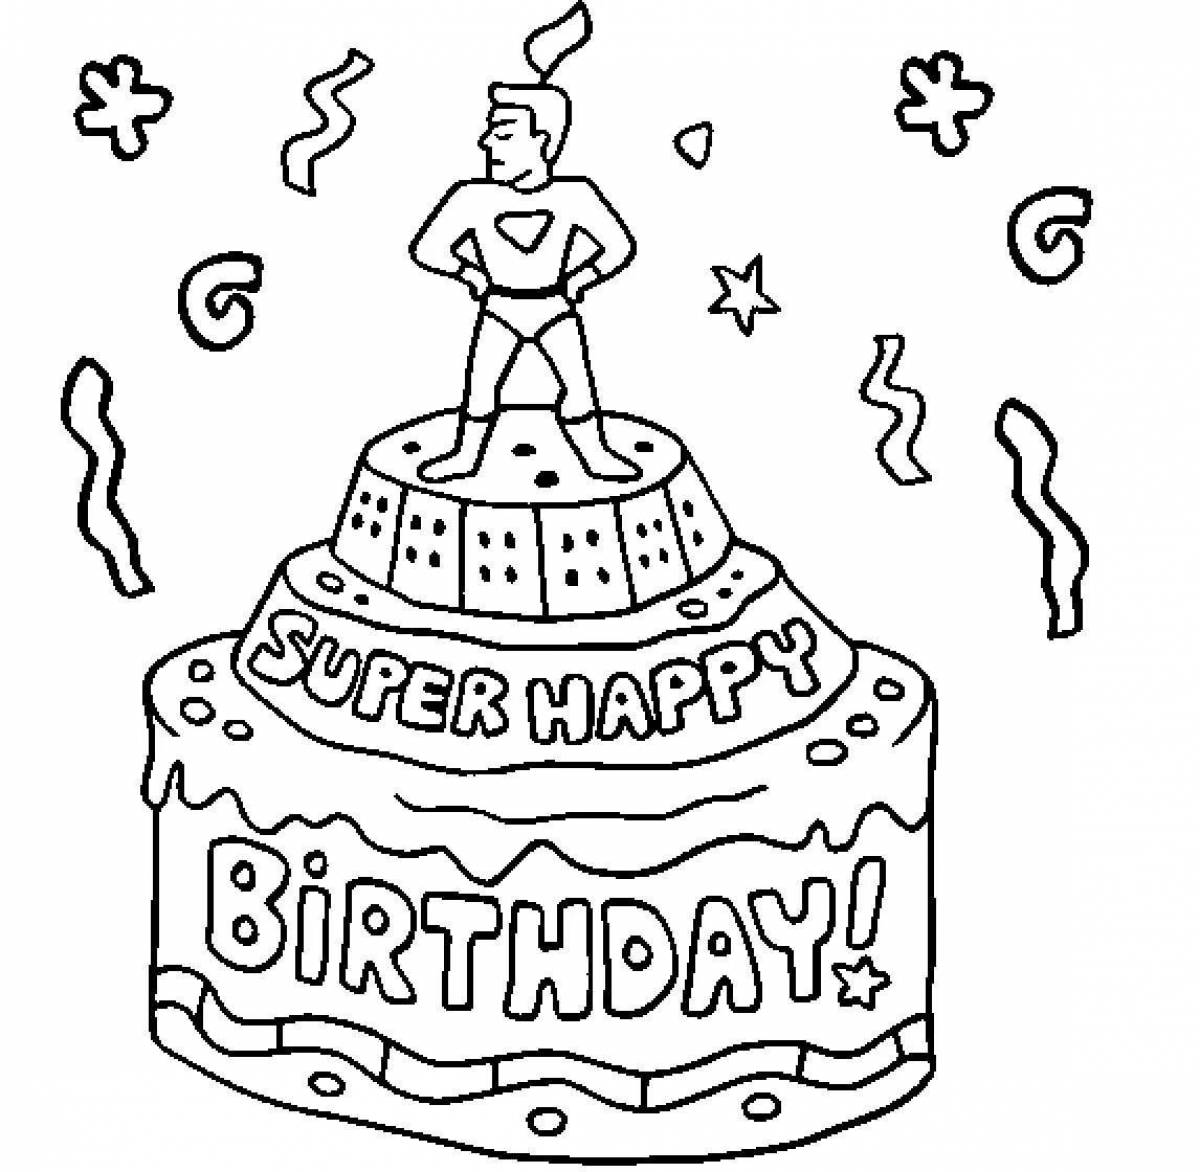 Happy Birthday Dad coloring book for kids